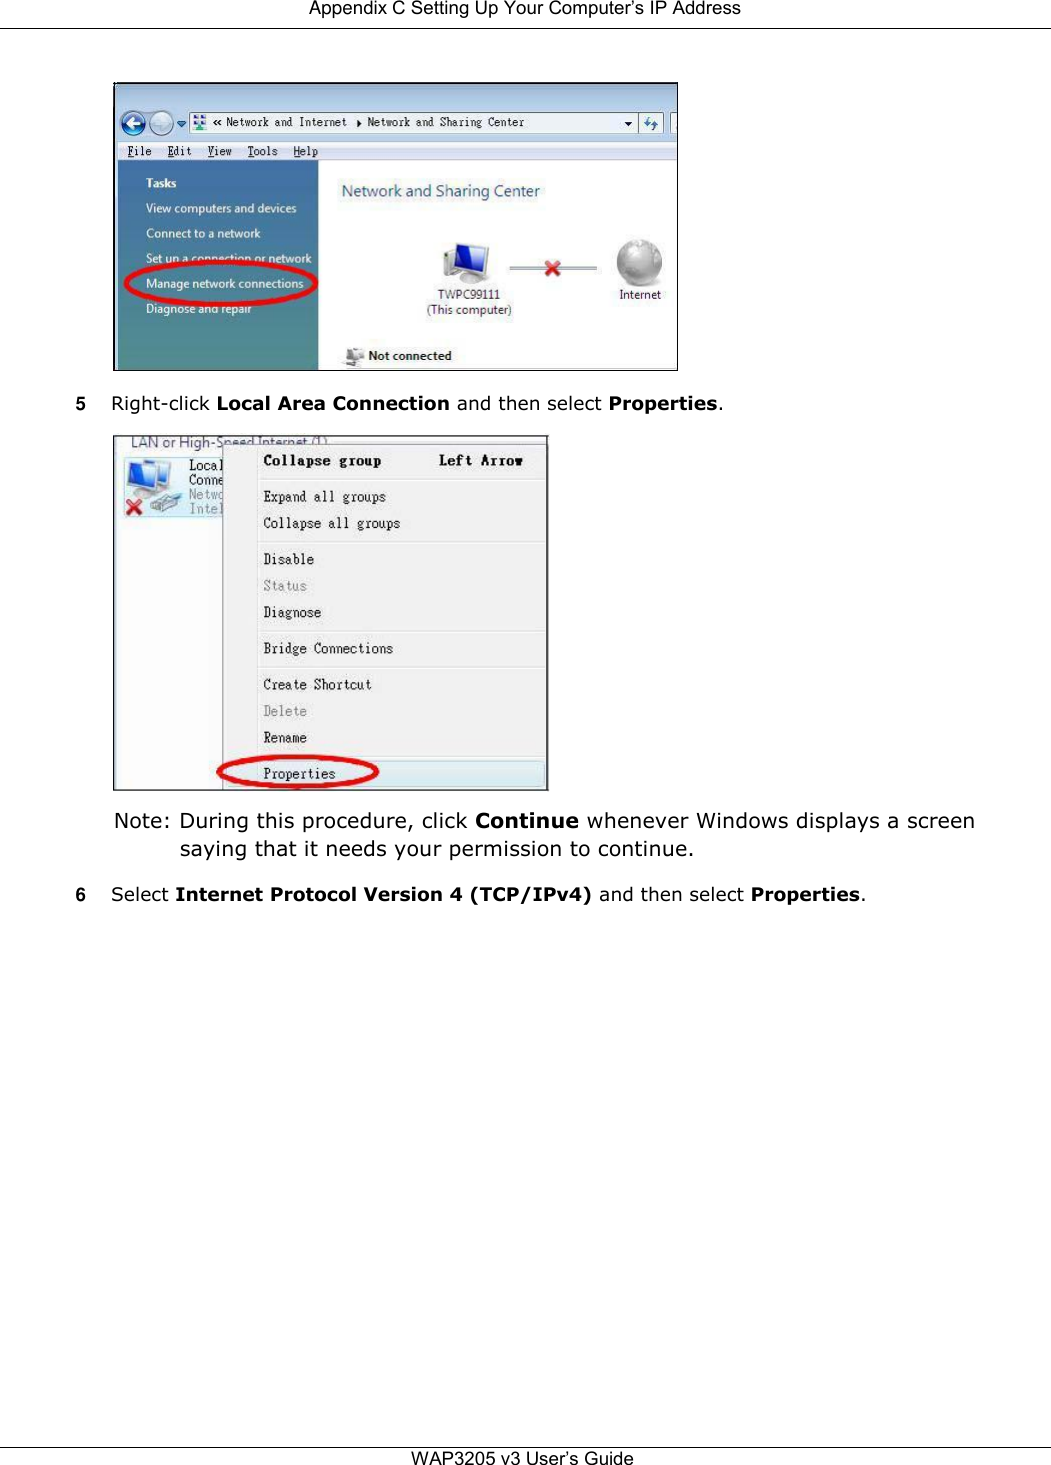  Appendix C Setting Up Your Computer’s IP Address                  5 Right-click Local Area Connection and then select Properties.                   Note: During this procedure, click Continue whenever Windows displays a screen saying that it needs your permission to continue.  6 Select Internet Protocol Version 4 (TCP/IPv4) and then select Properties.                           WAP3205 v3 User’s Guide 